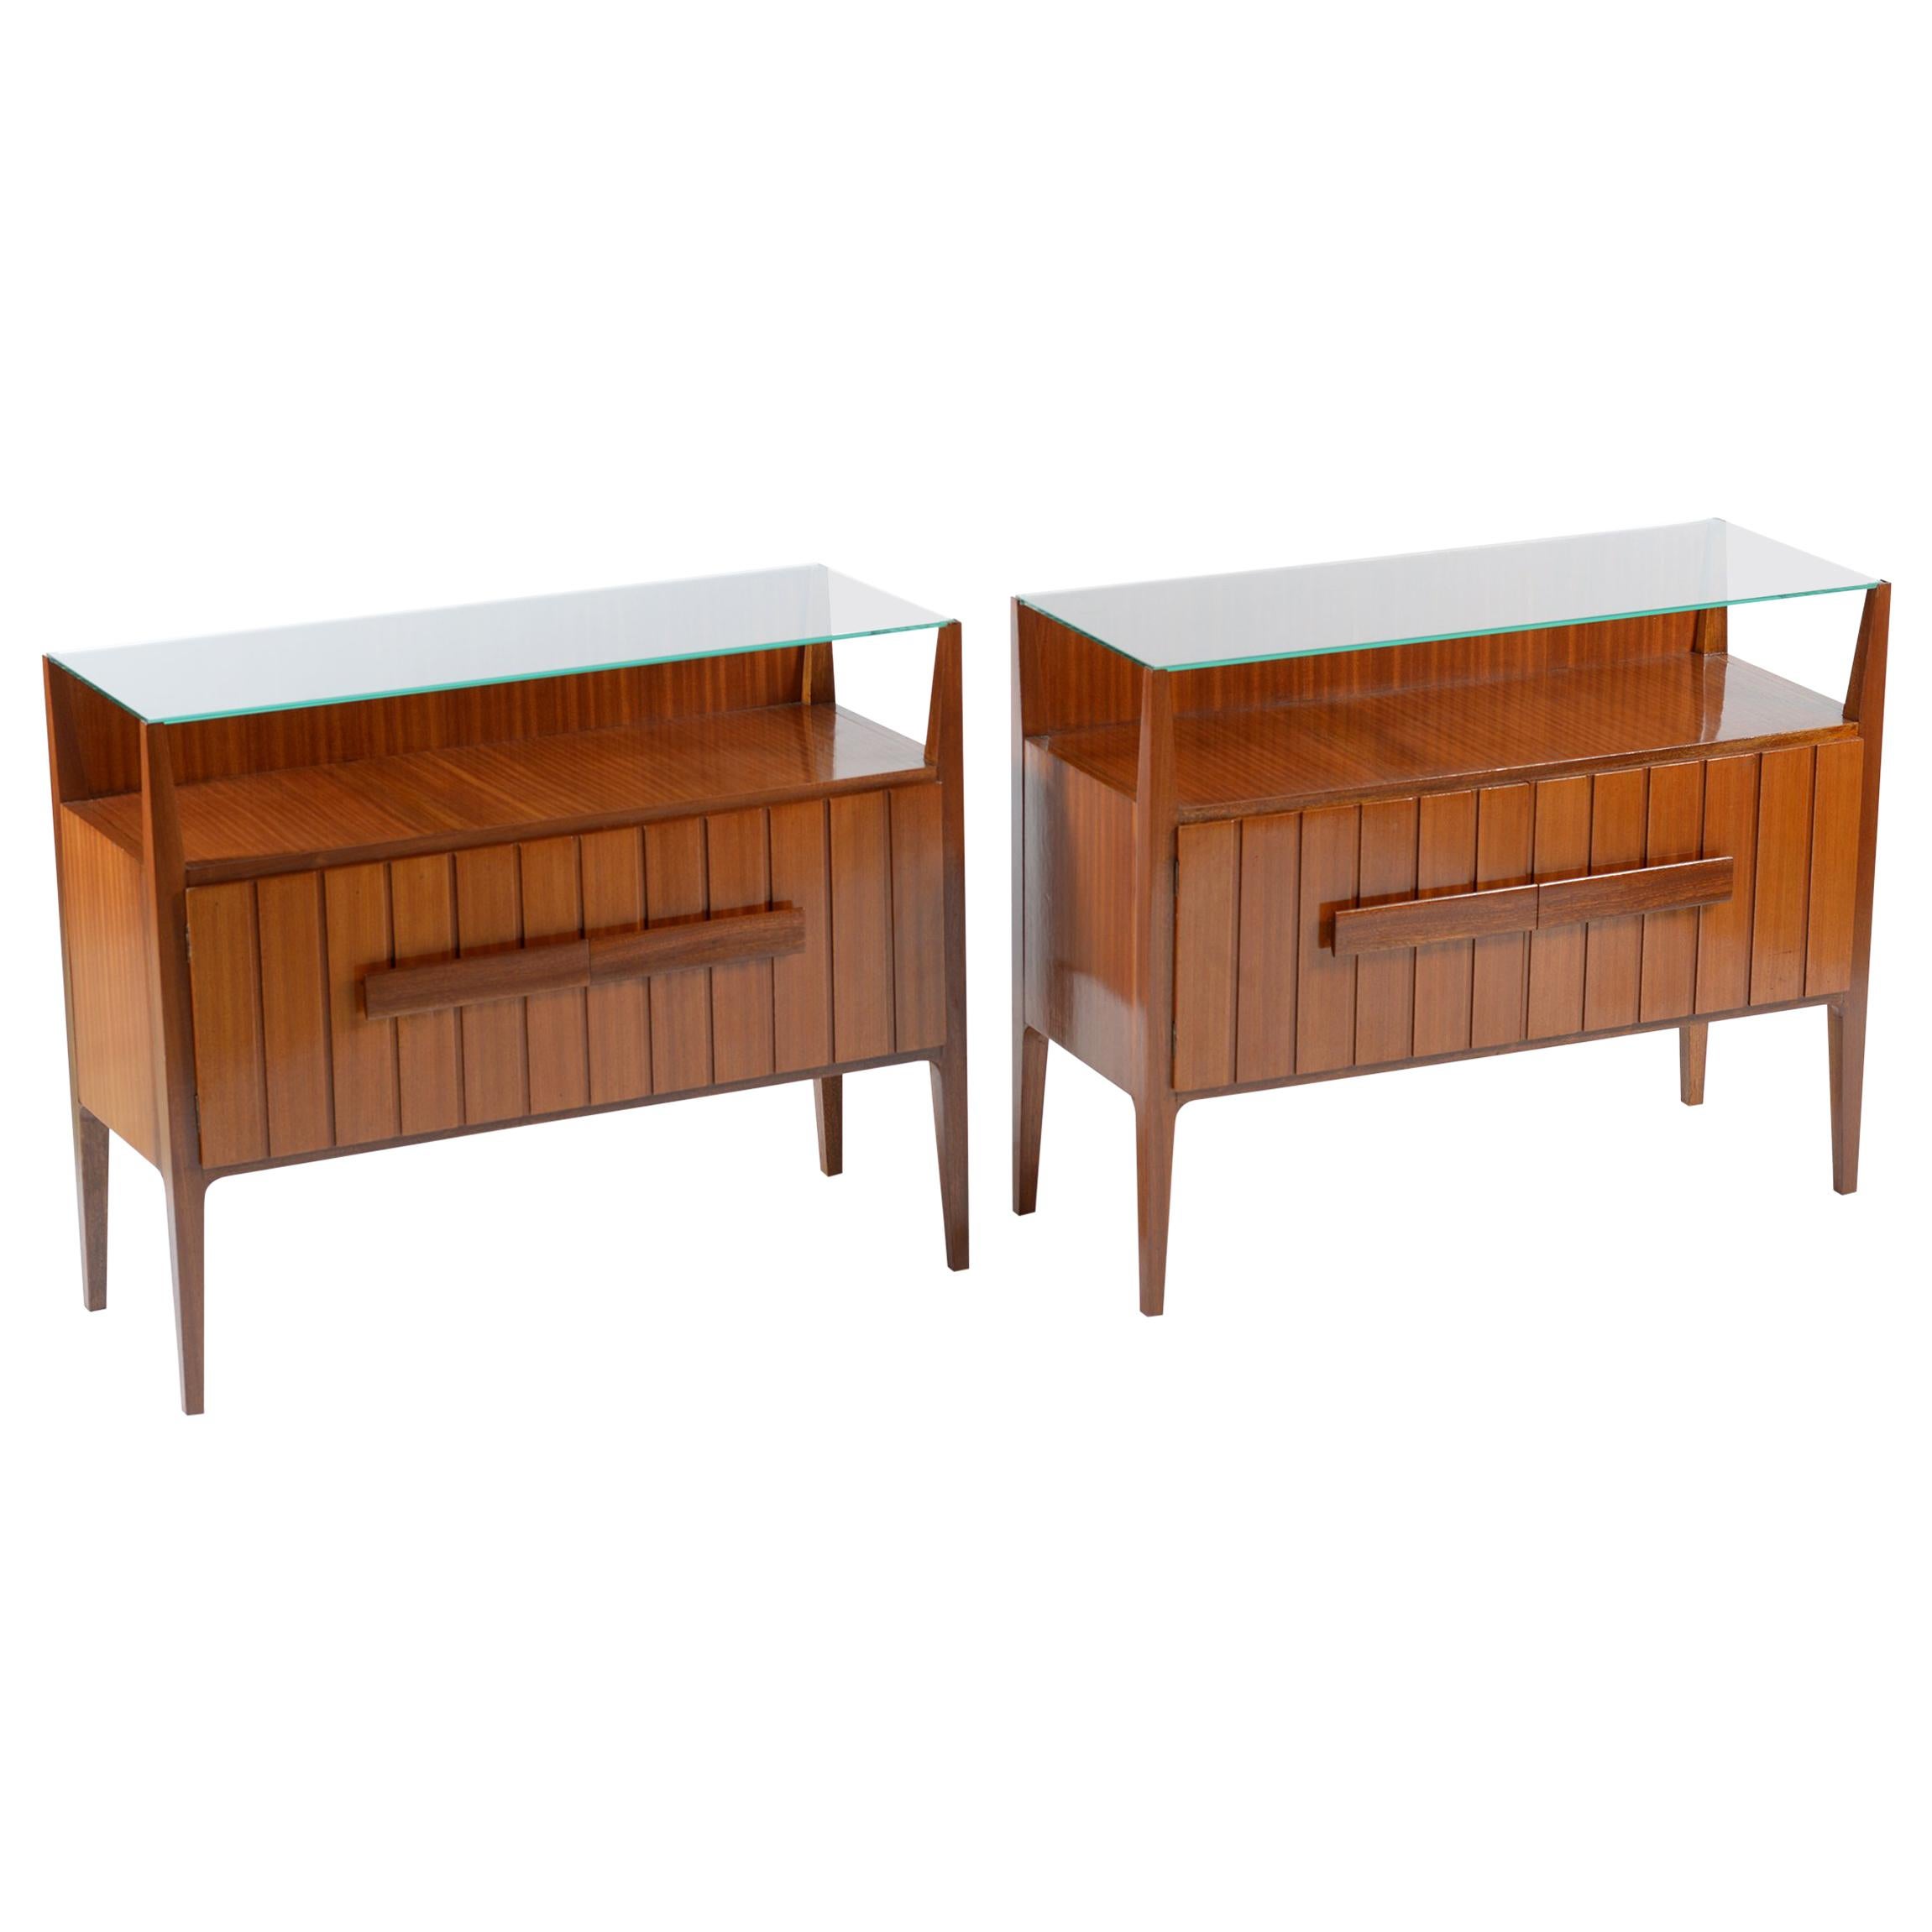 Midcentury Italian Pair of Nightstands or Side Tables with Glass Top, 1950